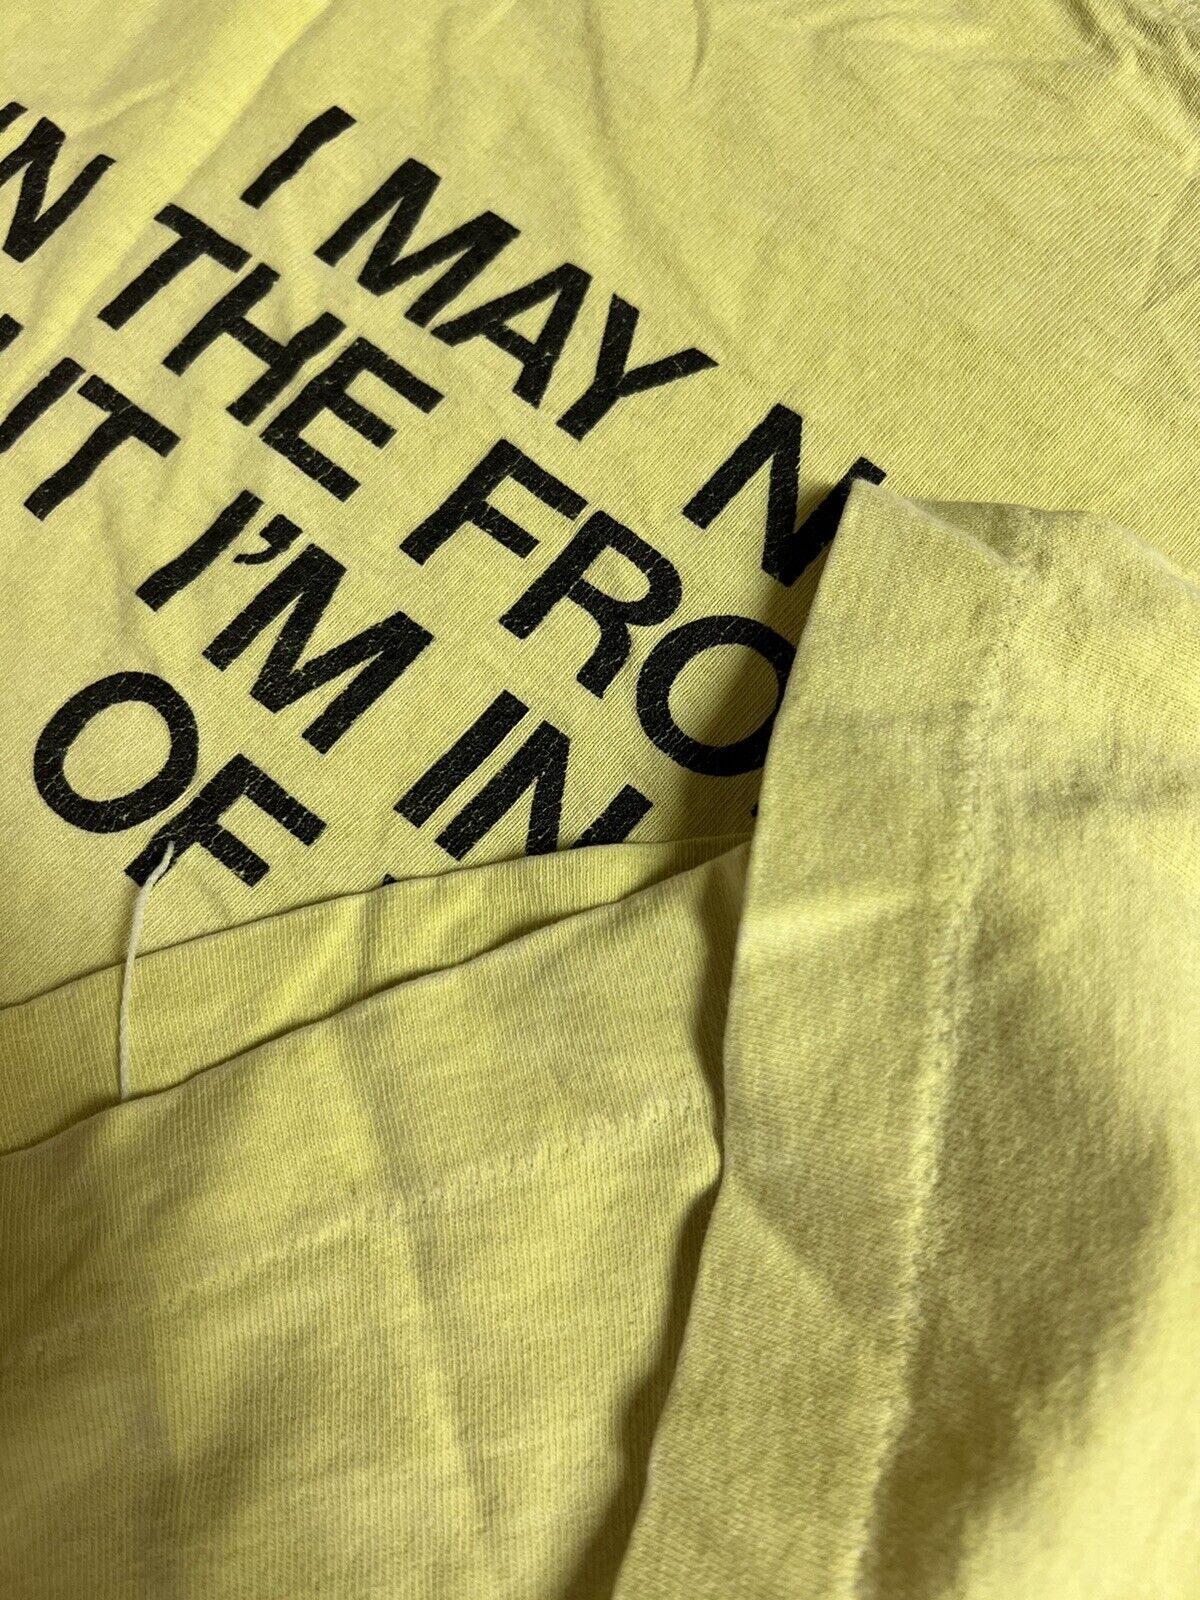 Vintage Front Row Ticket T-shirt XL Yellow New Hampshire Concert *As Is